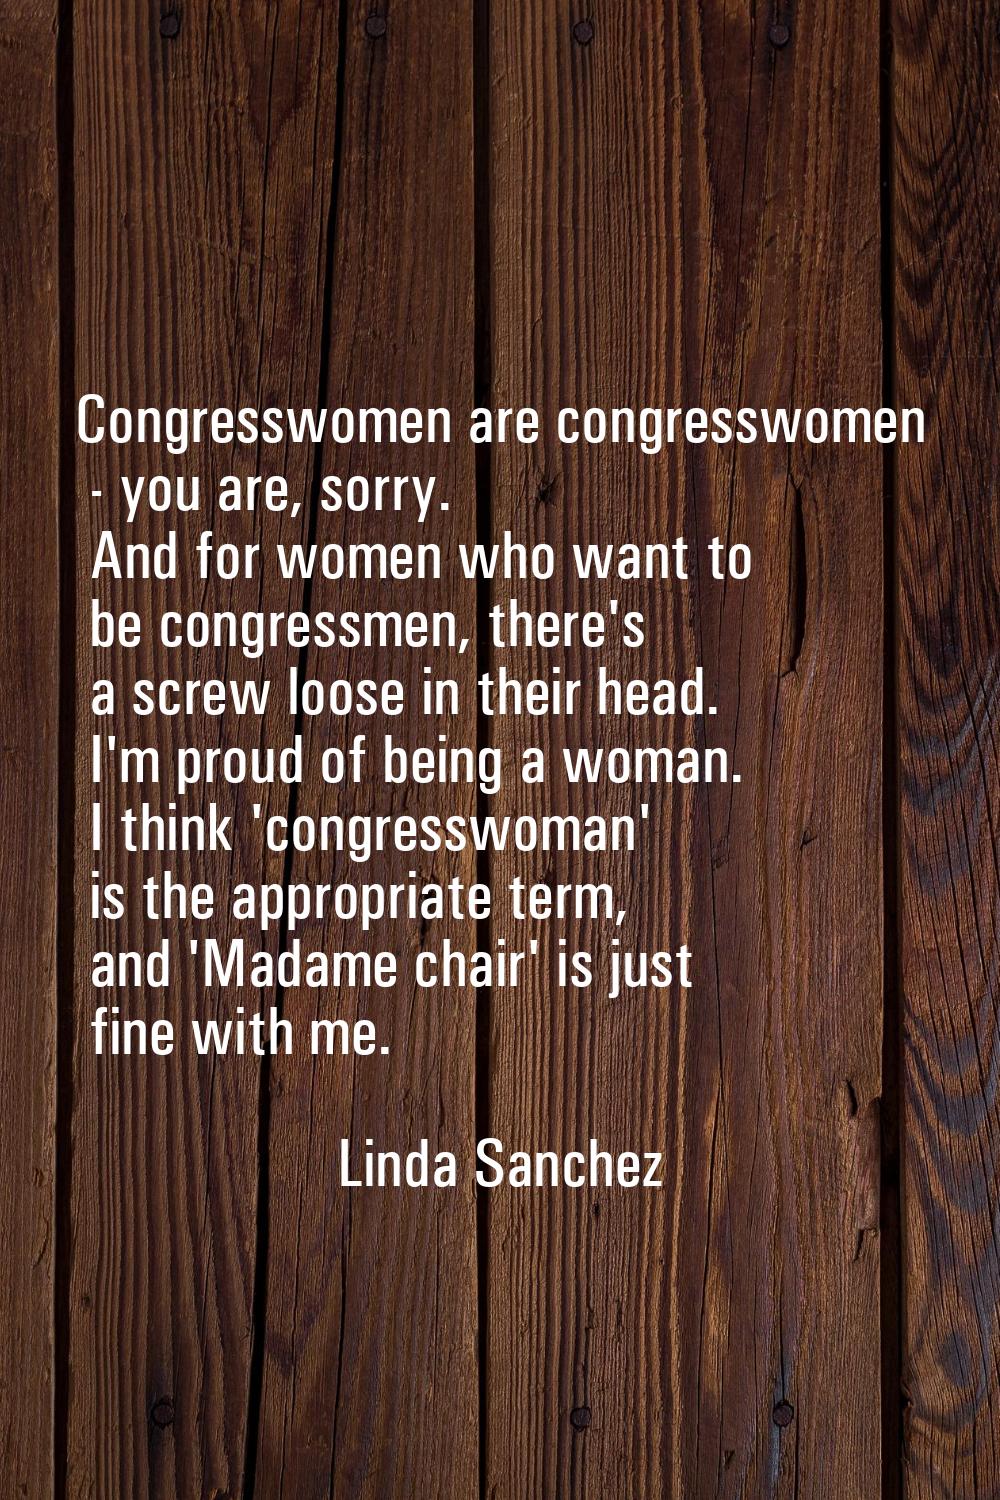 Congresswomen are congresswomen - you are, sorry. And for women who want to be congressmen, there's